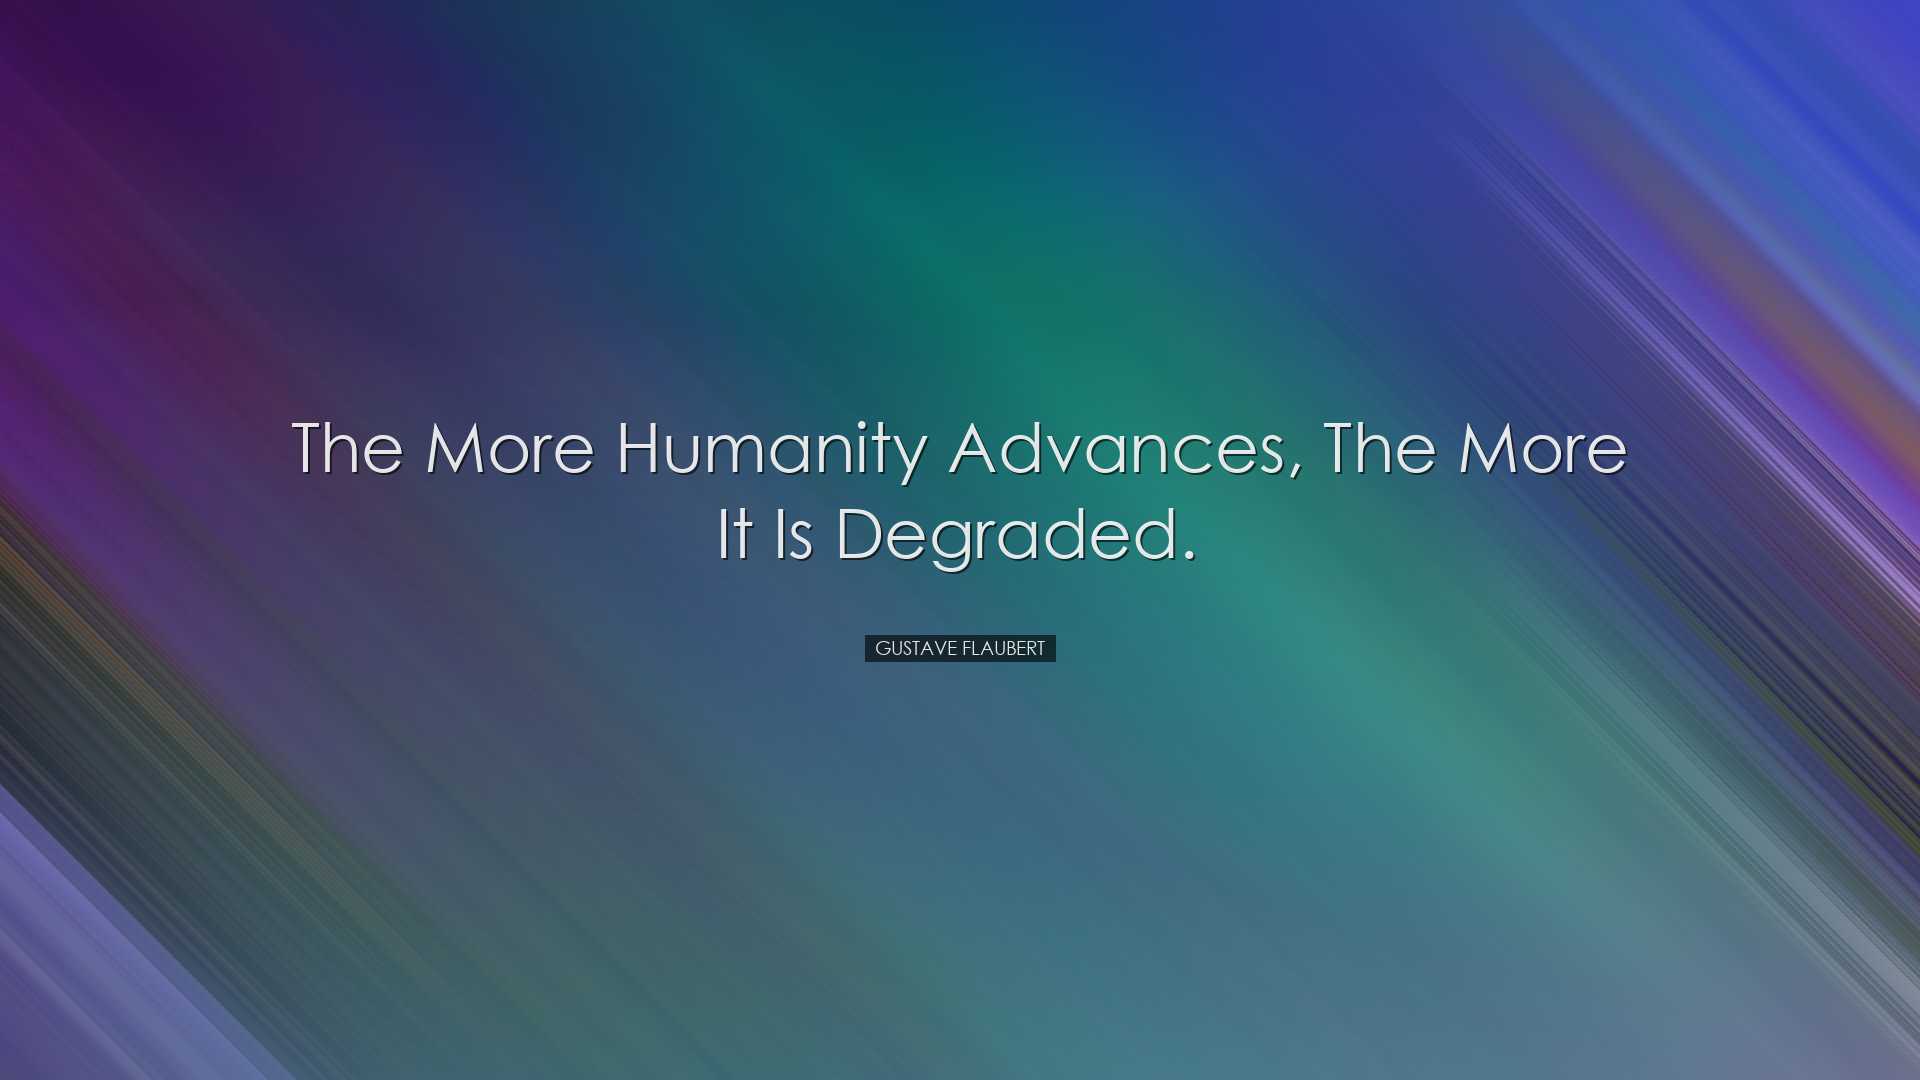 The more humanity advances, the more it is degraded. - Gustave Fla